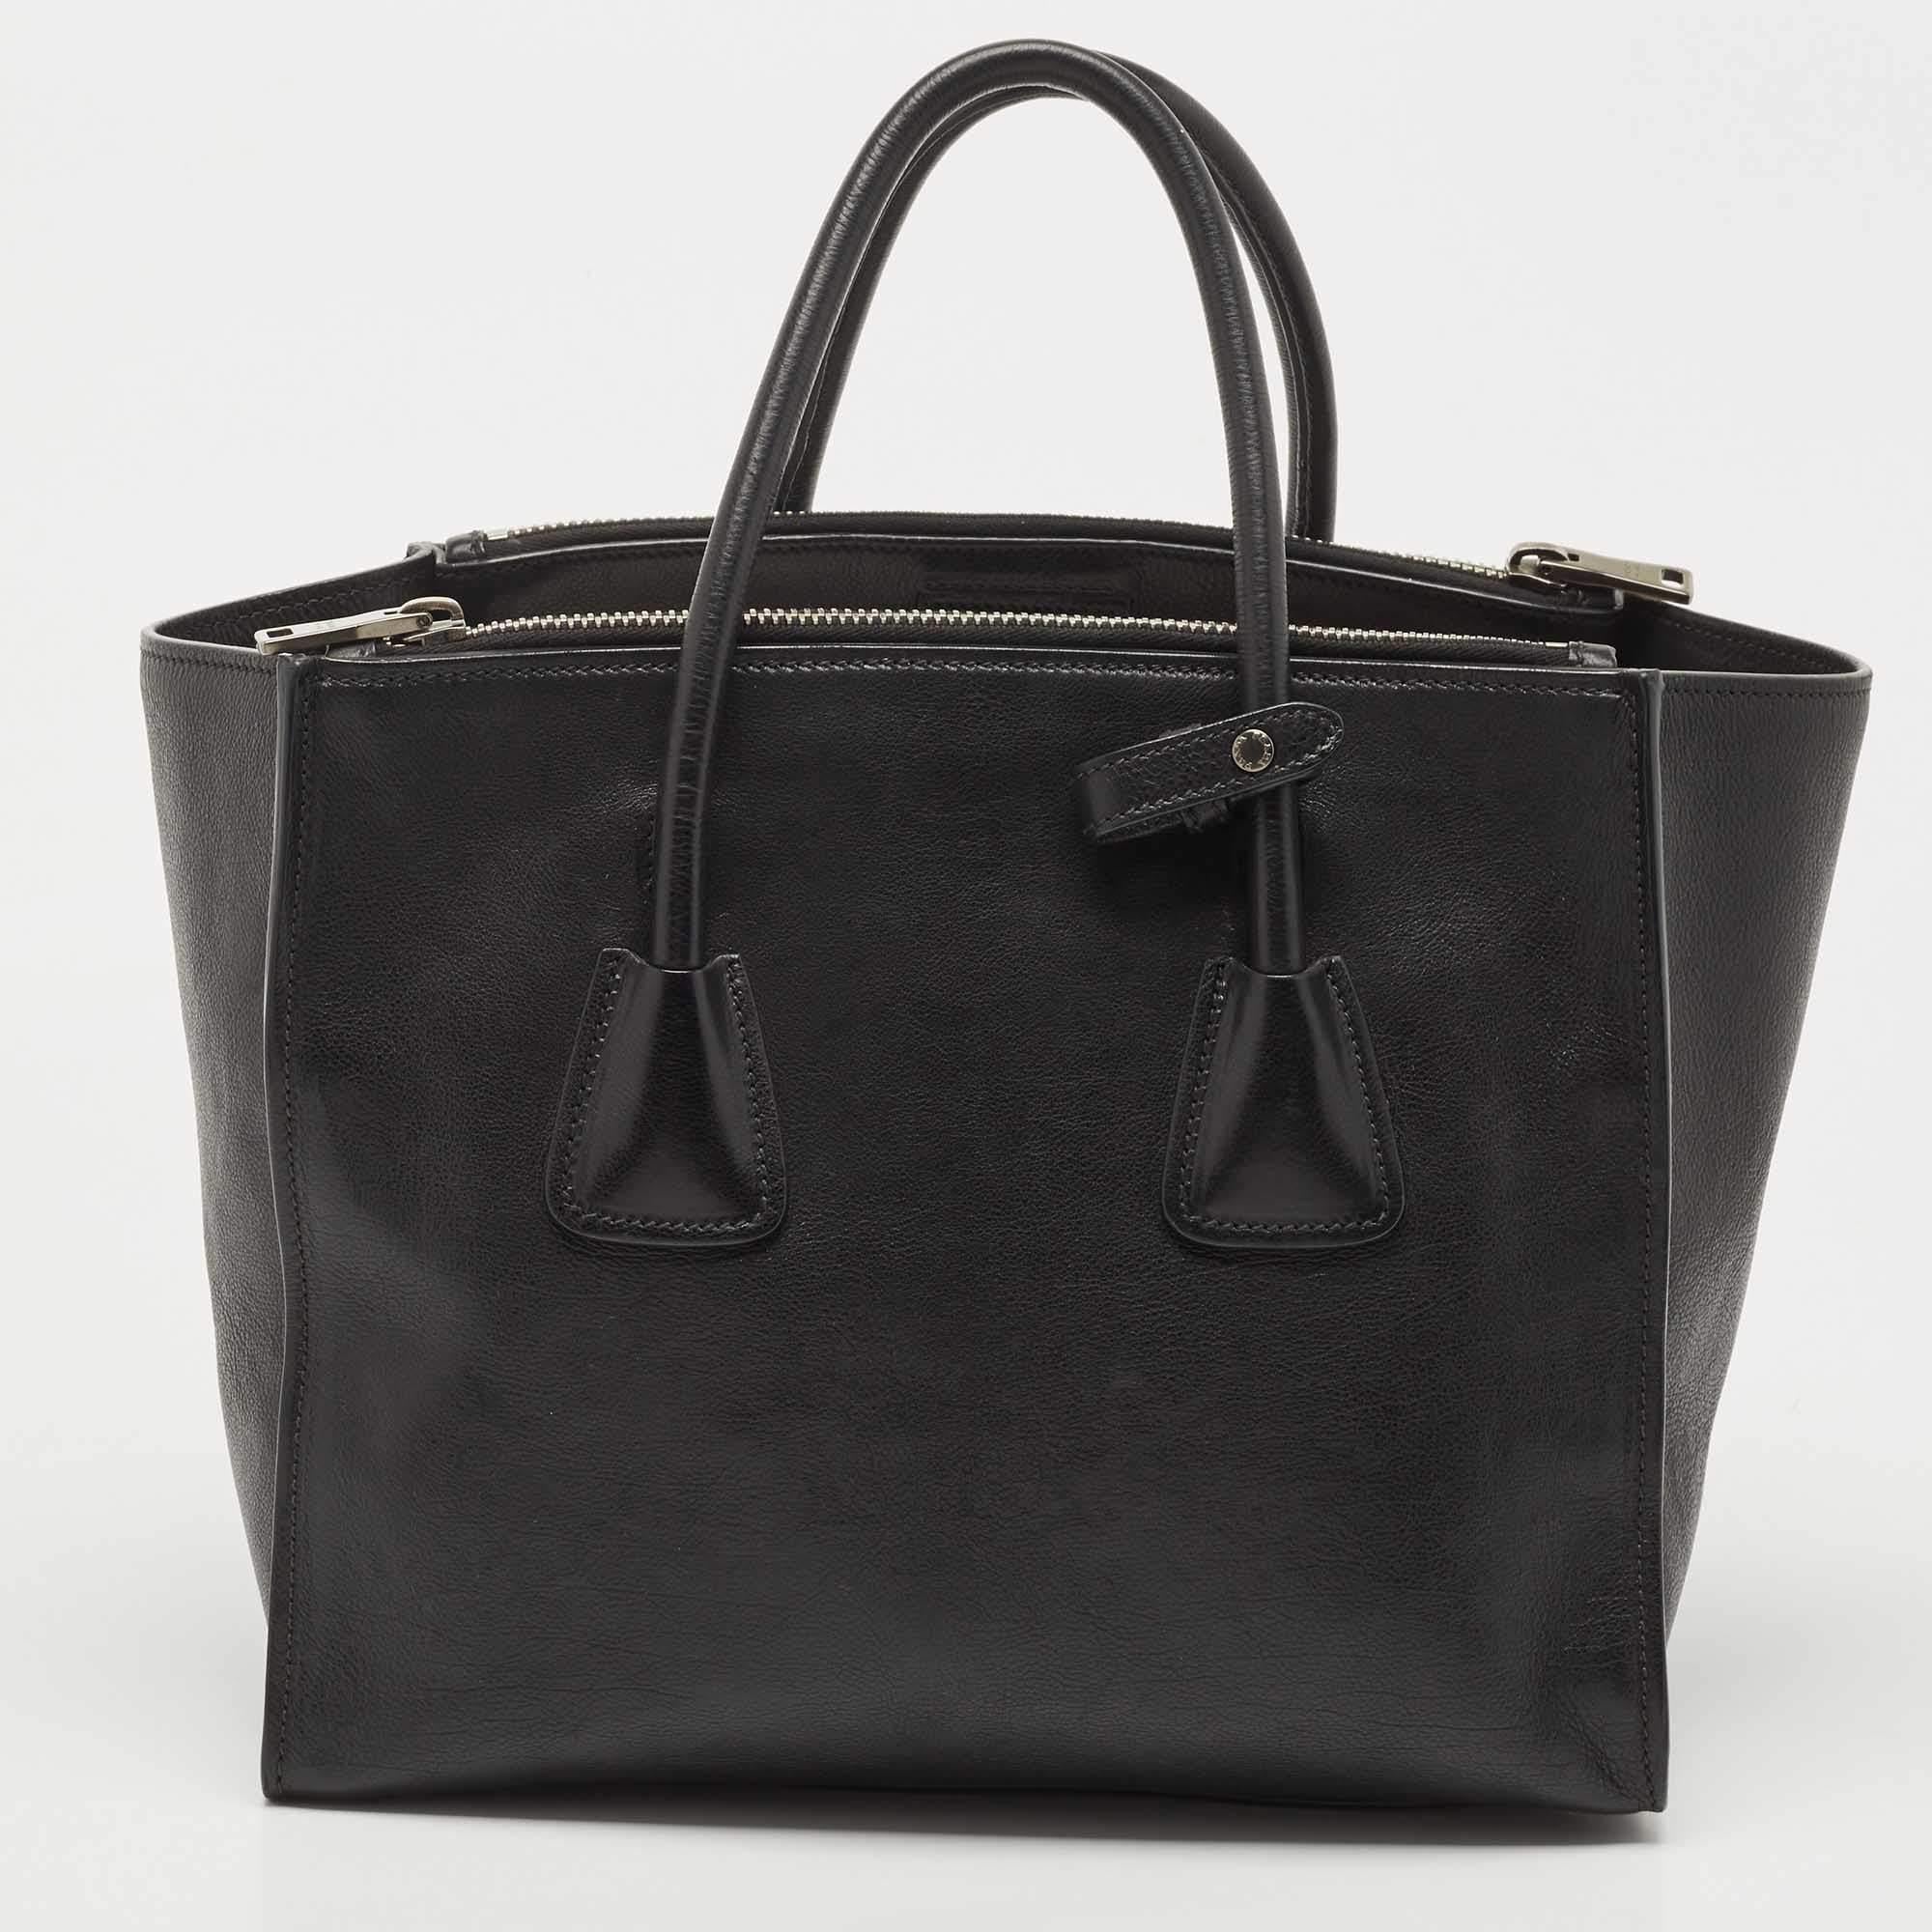 Add timeless style and luxury to your everyday looks with this stunning Prada tote. Crafted in black leather, this bag can store all that you need in its interior. The bag is equipped with the brand logo on the front and dual handles.

Includes: